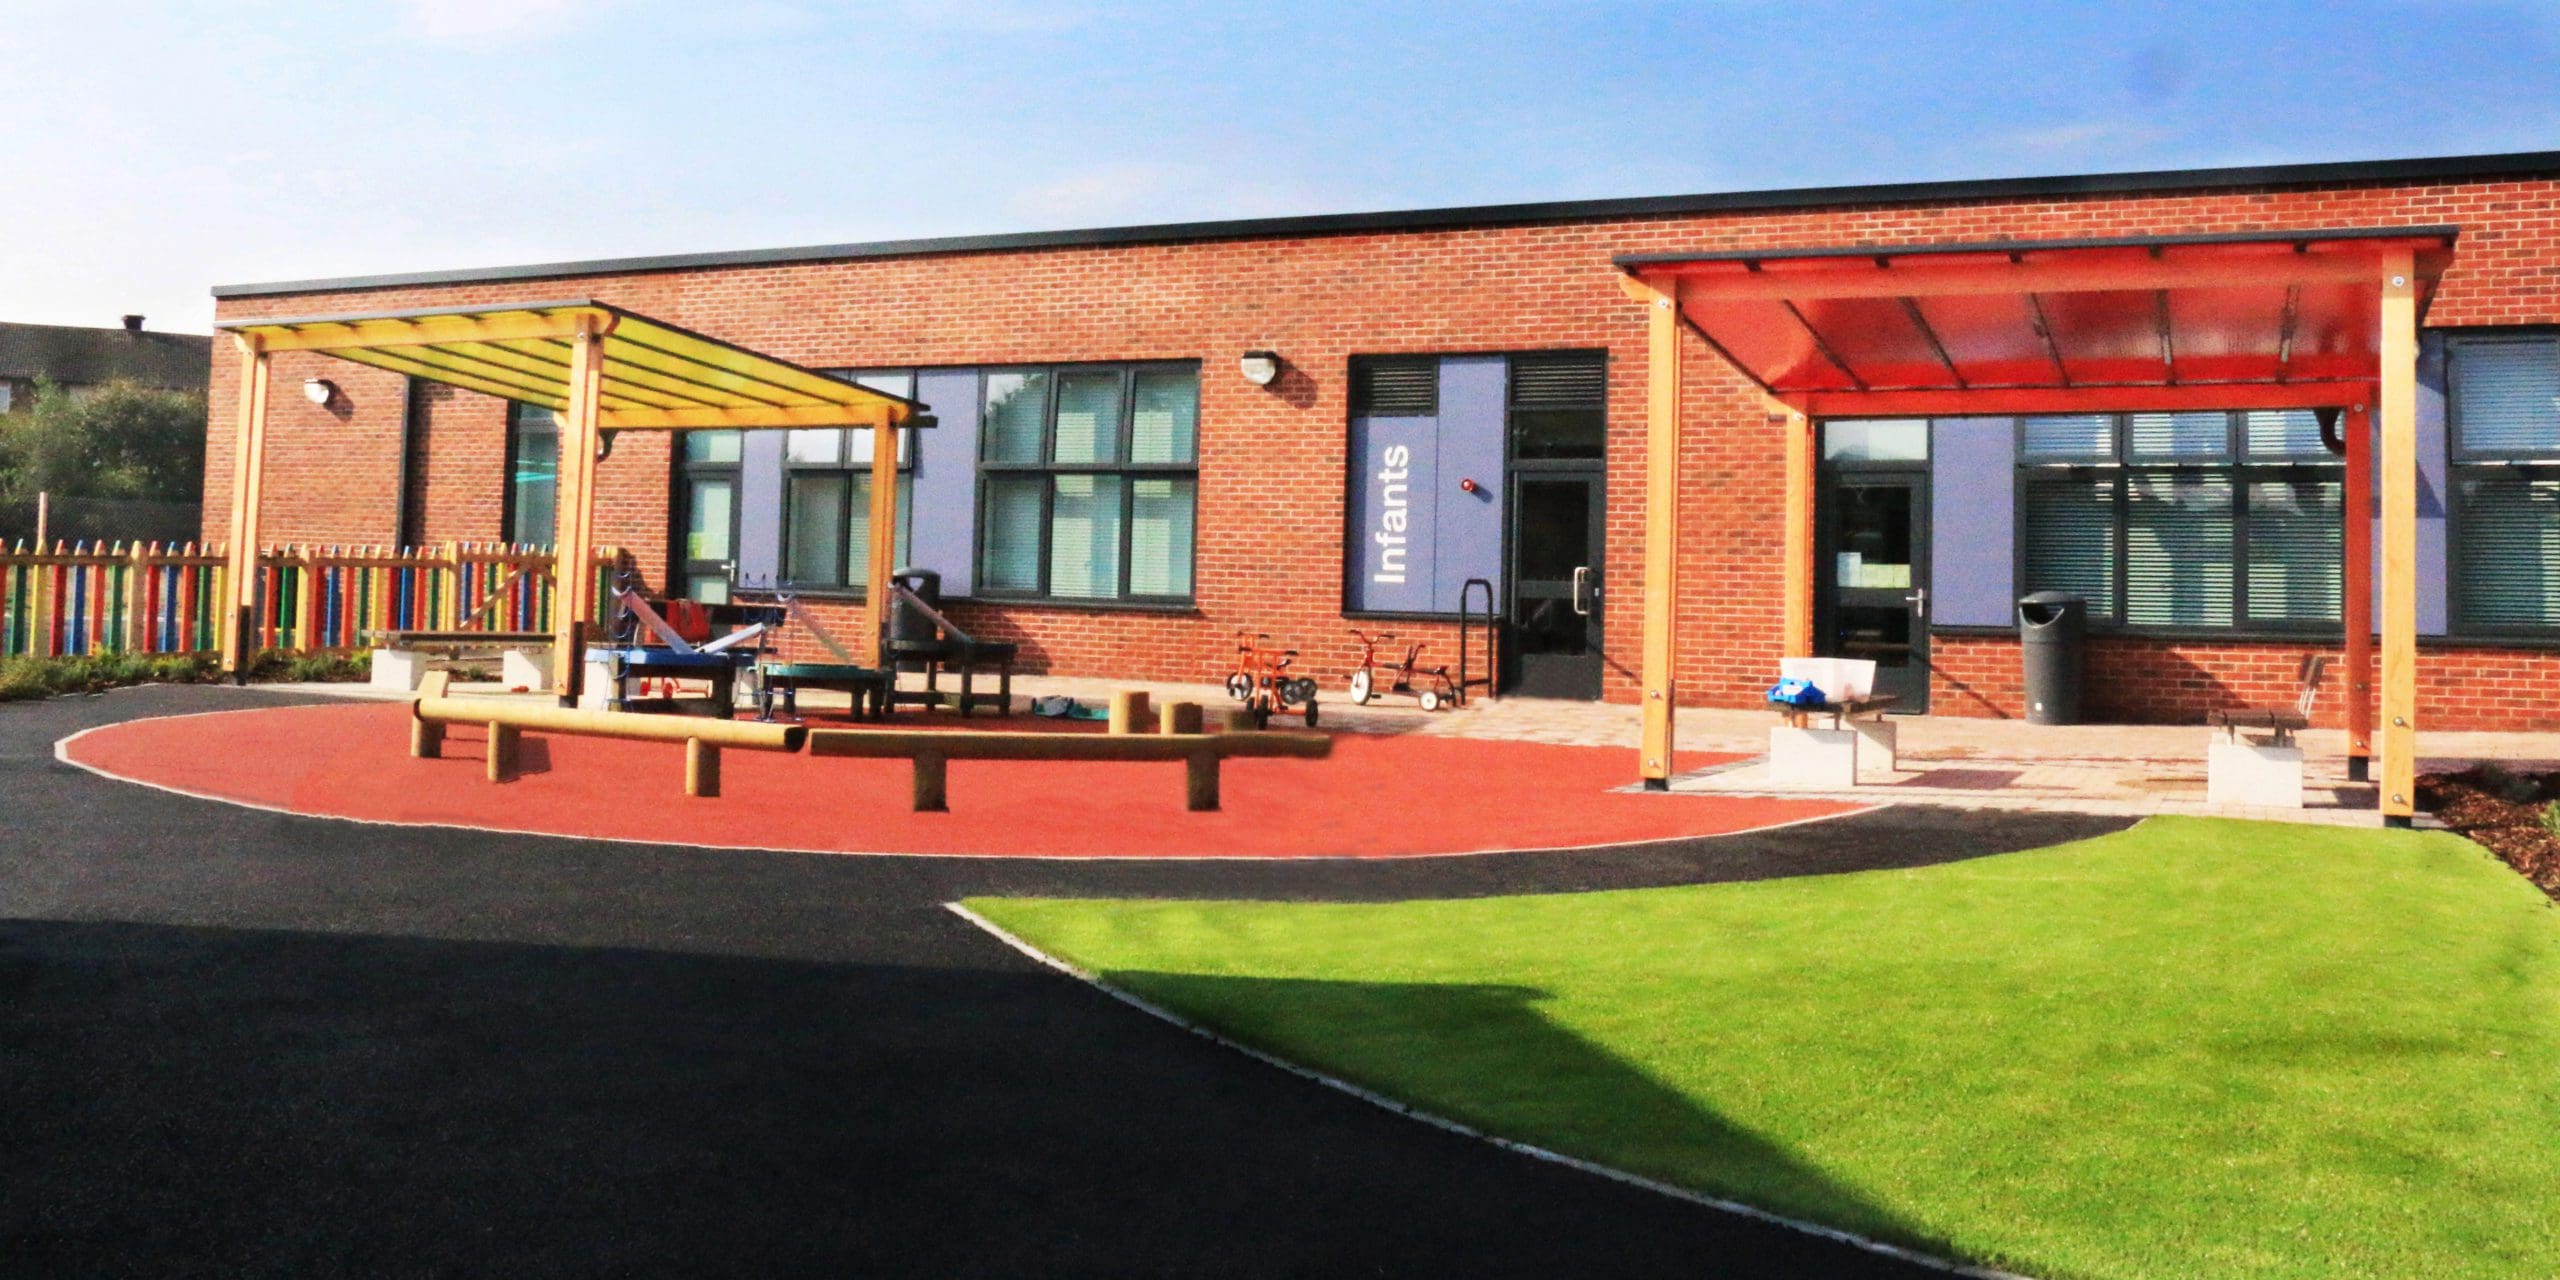 2 external pergolas, one with red and one with yellow tinted canopy colours infront on red coloured tarmac playground